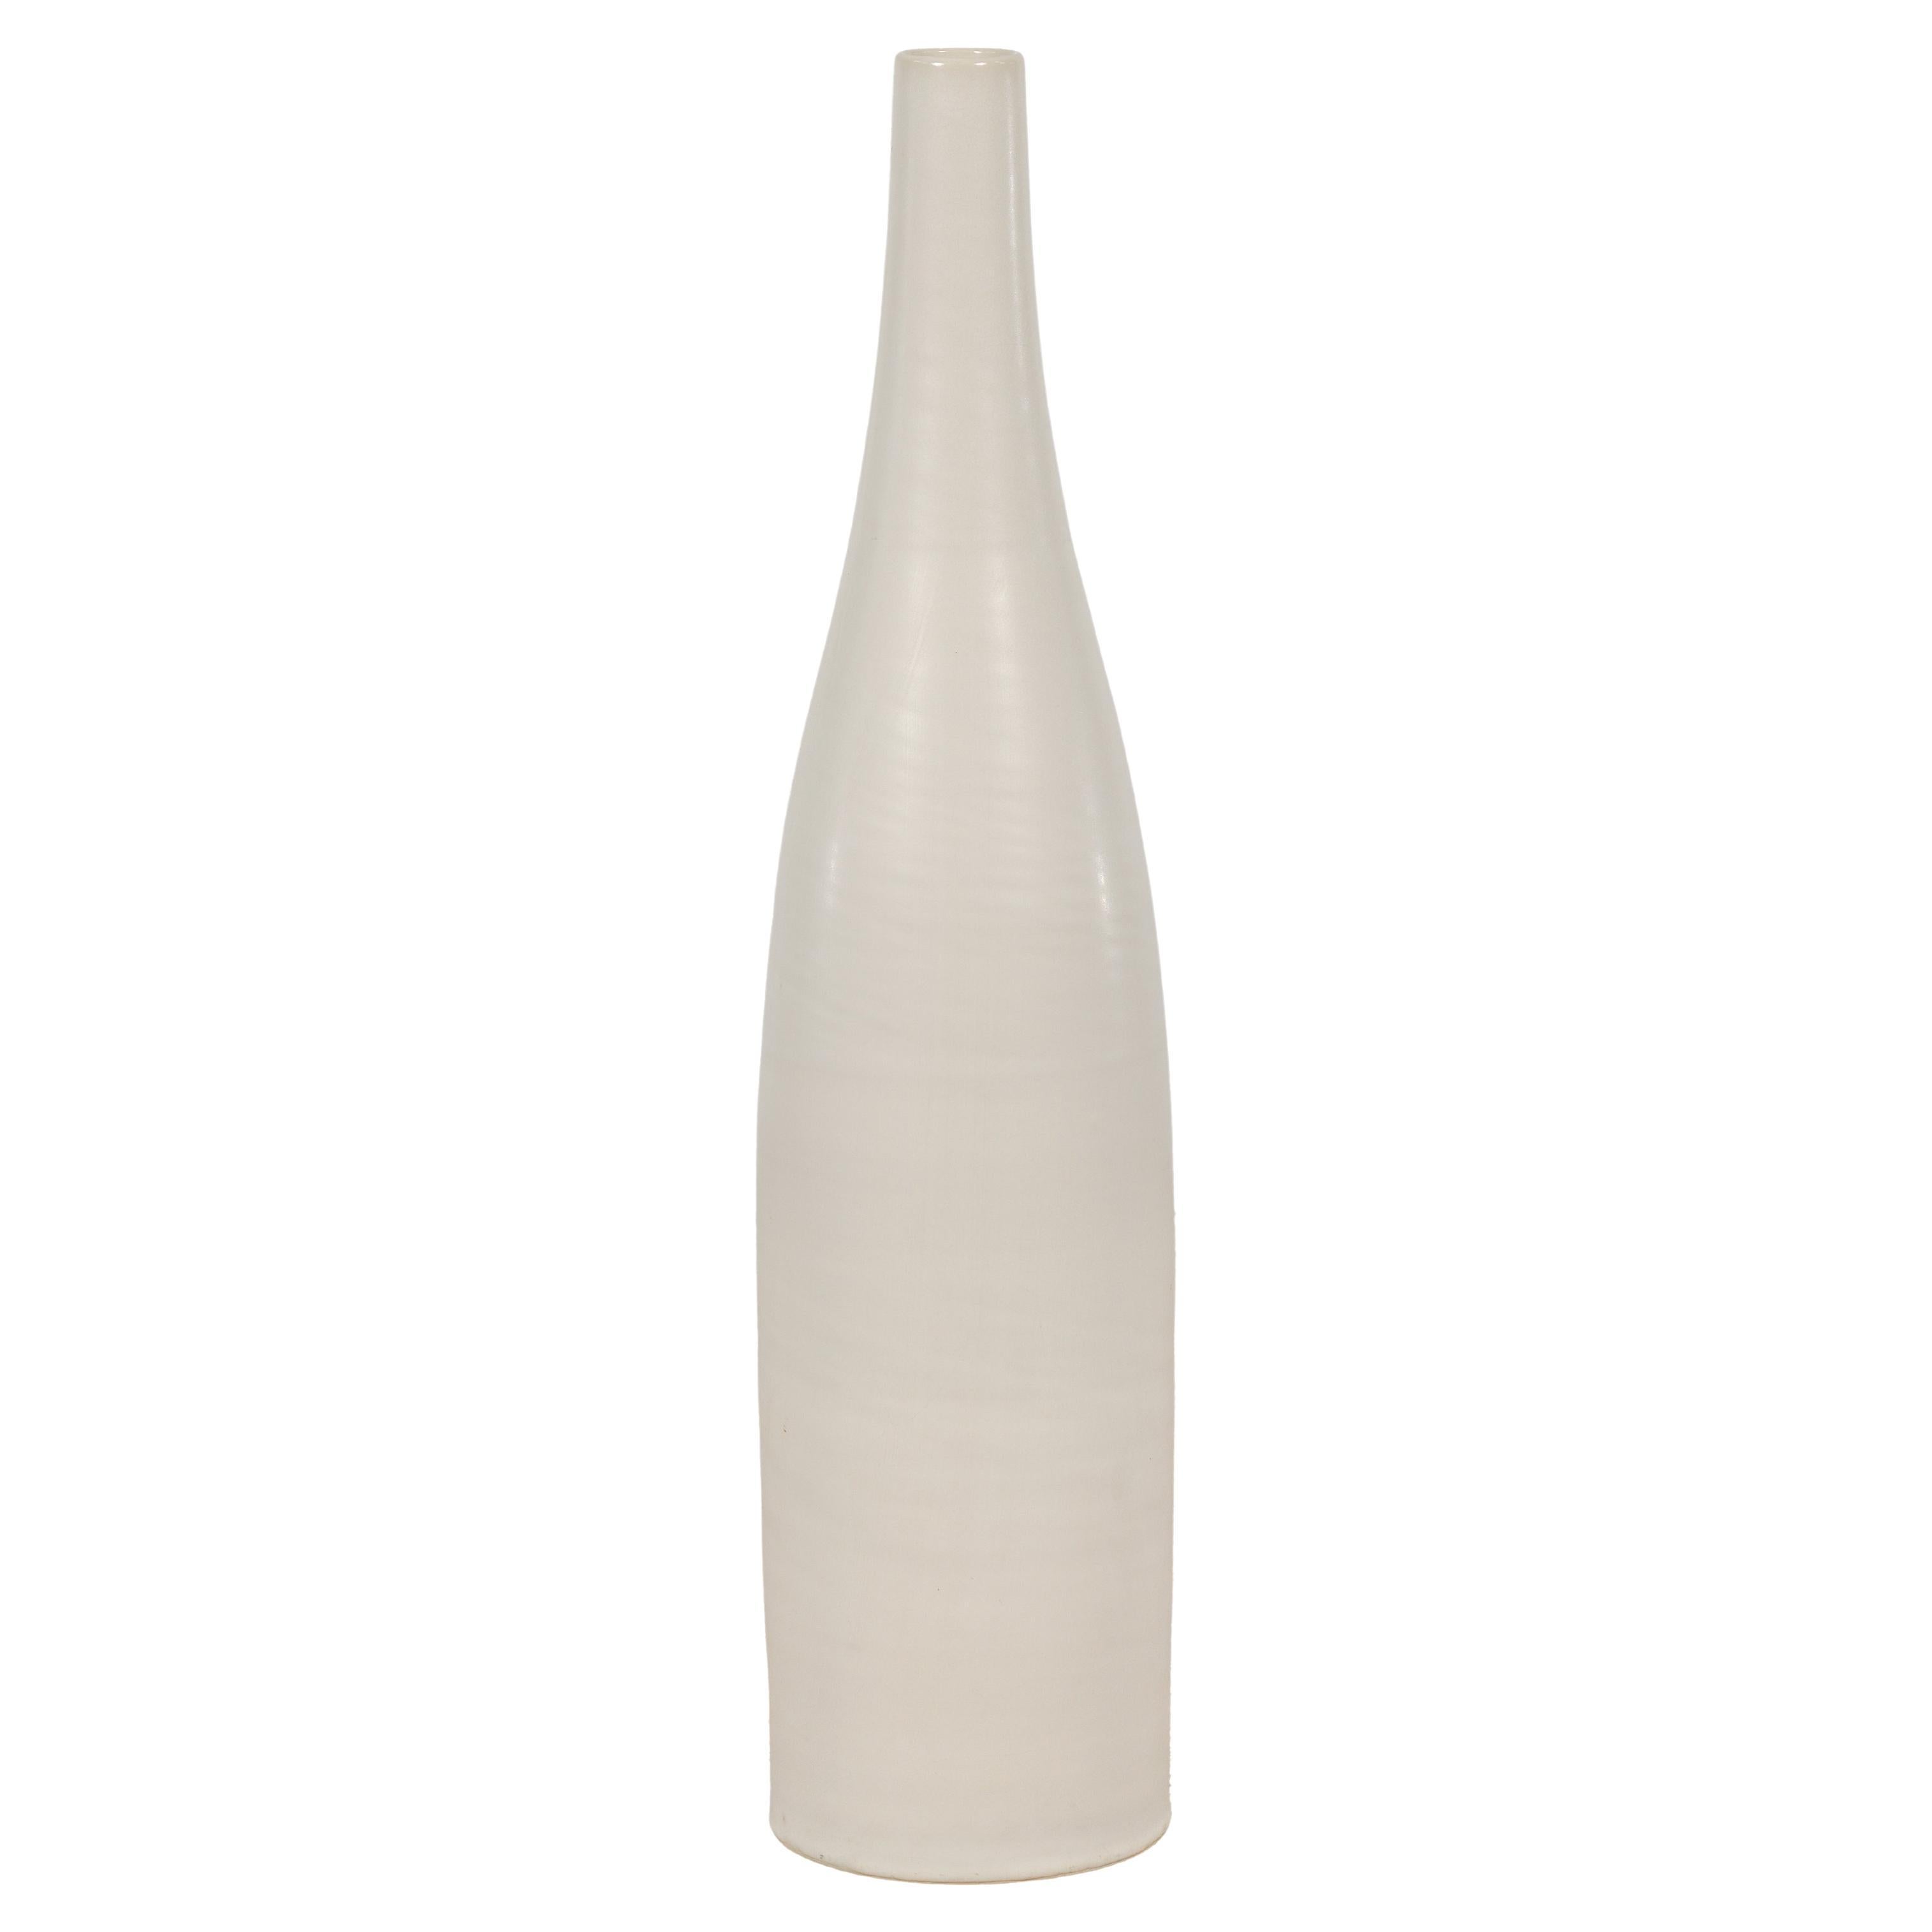 Tall Contemporary Artisan-Made Vase with Cream Glaze and Slender Silhouette